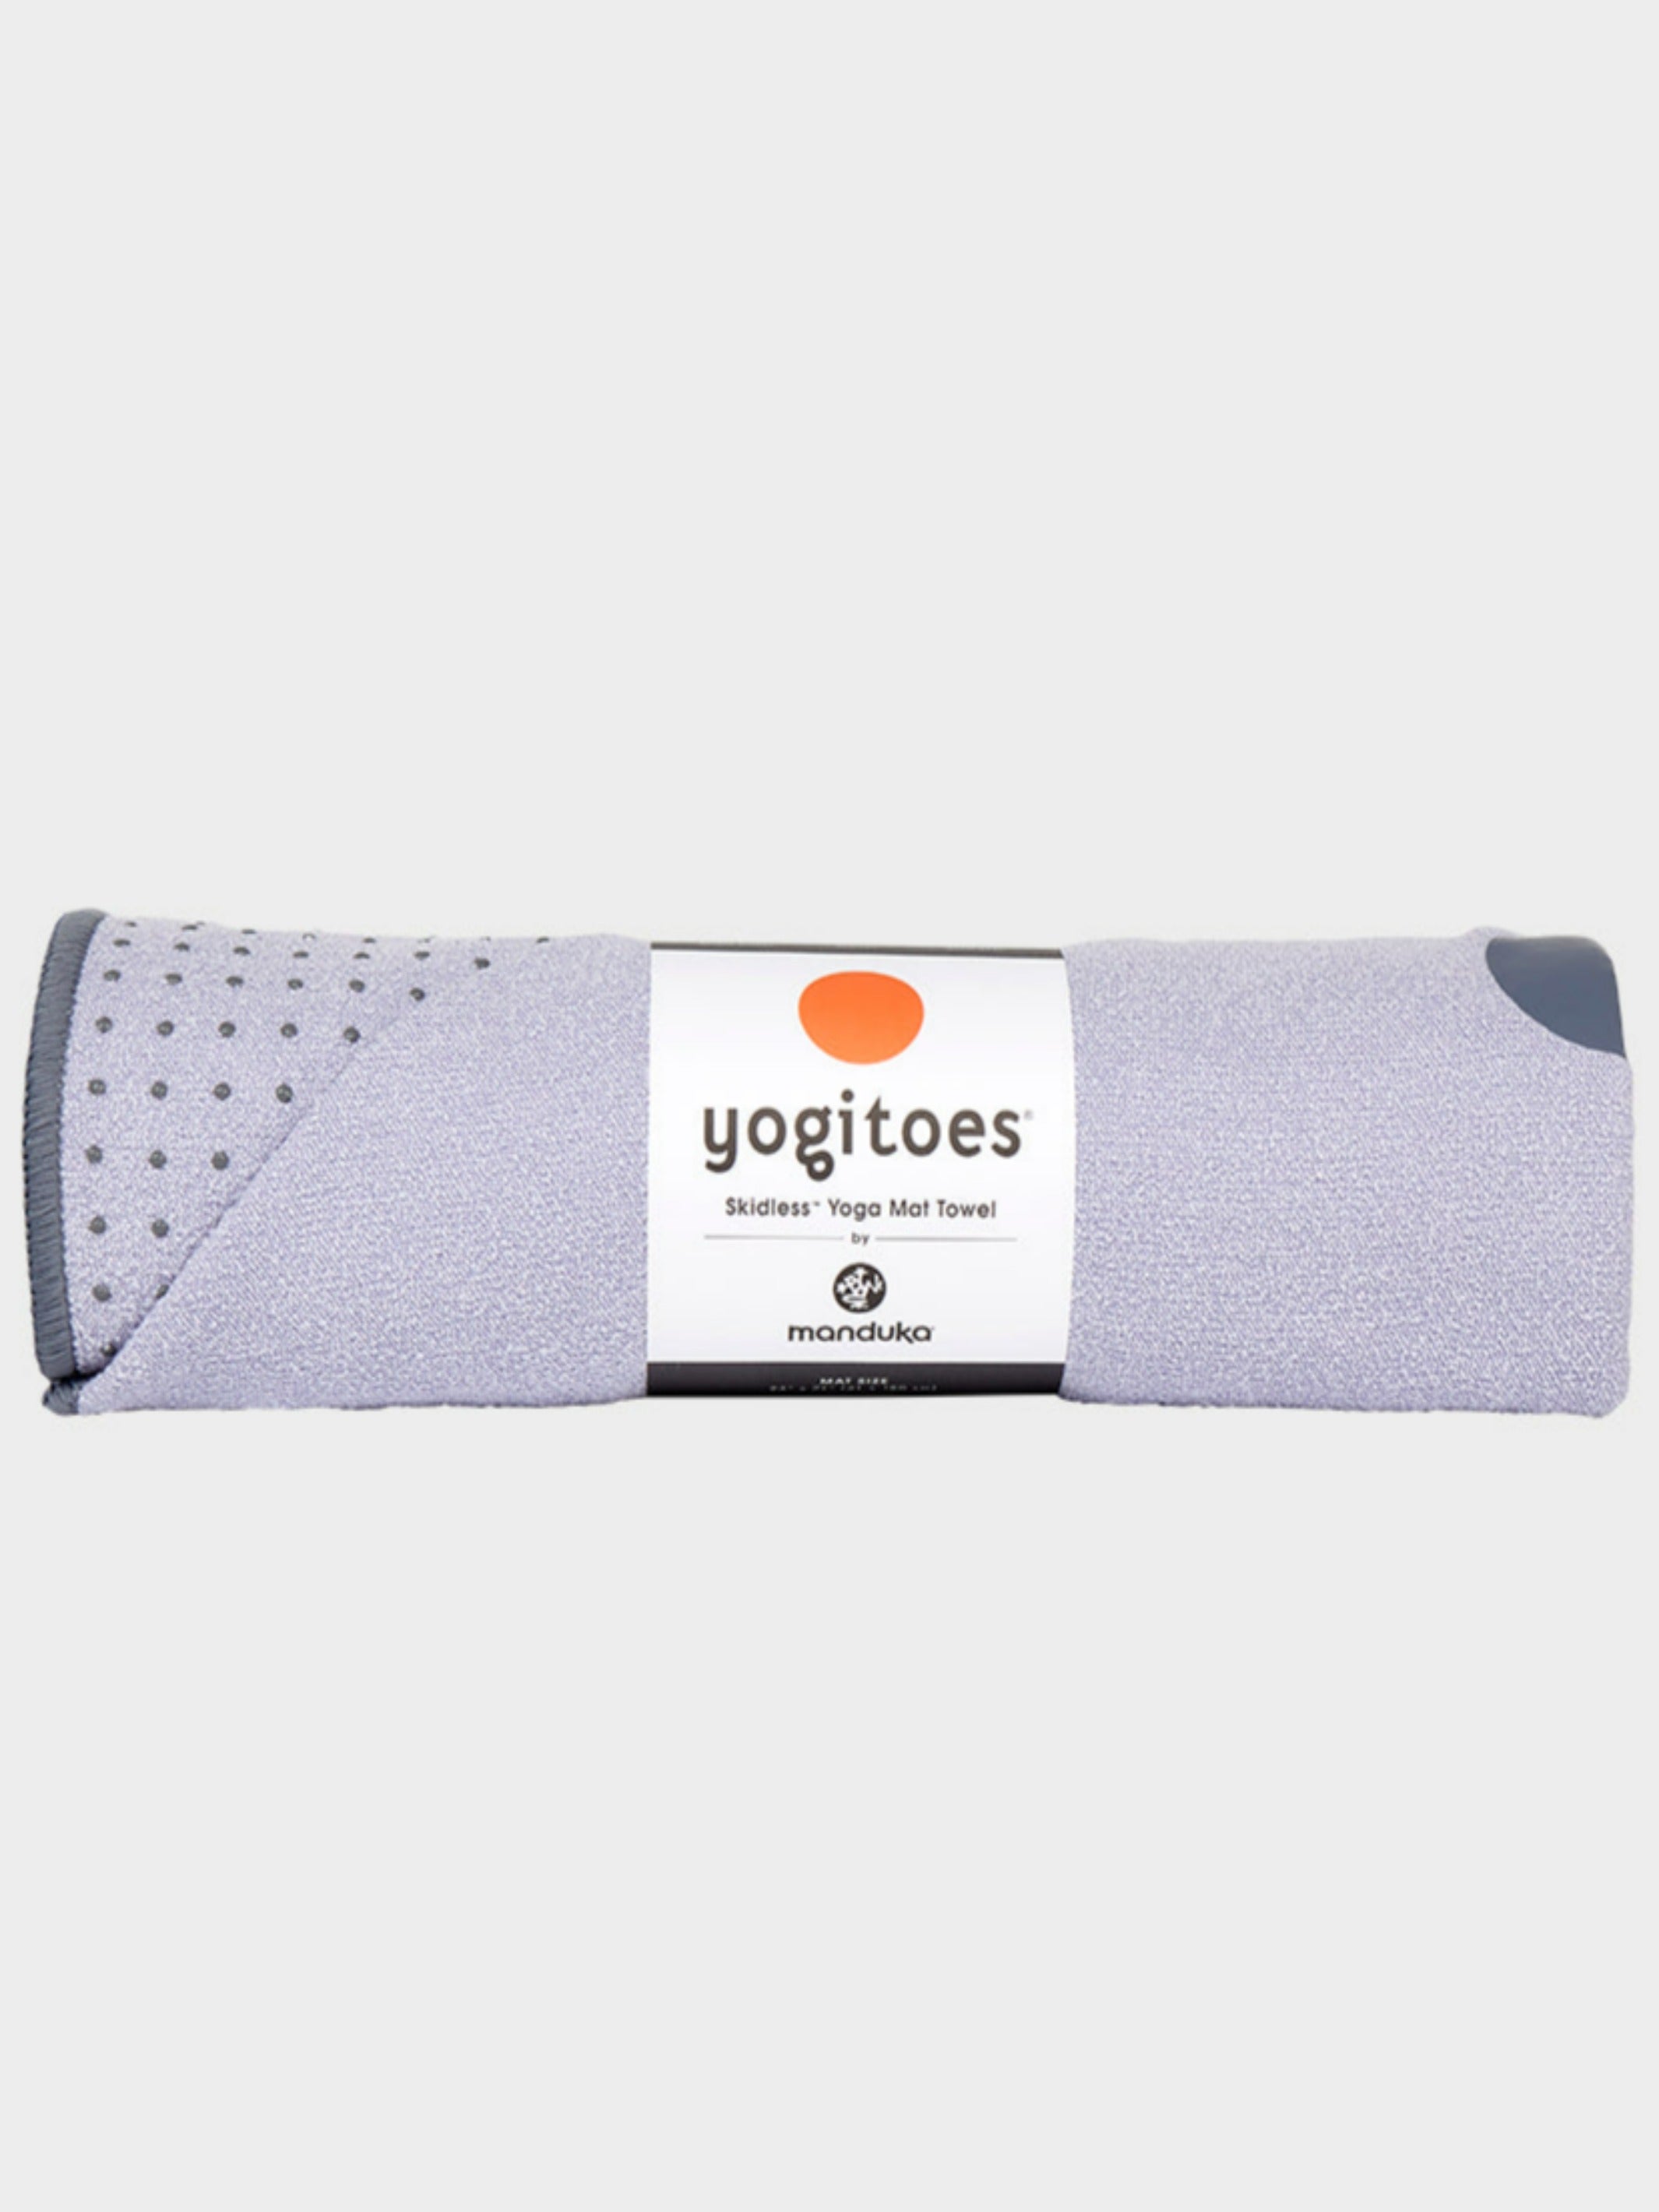 FormFit Ultra Plush Grey Yoga Towel - 68x24 Inches - Super Absorbent  Polyester Blend - Perfect Pilates & Yoga Accessory - FF GR Yoga Towel